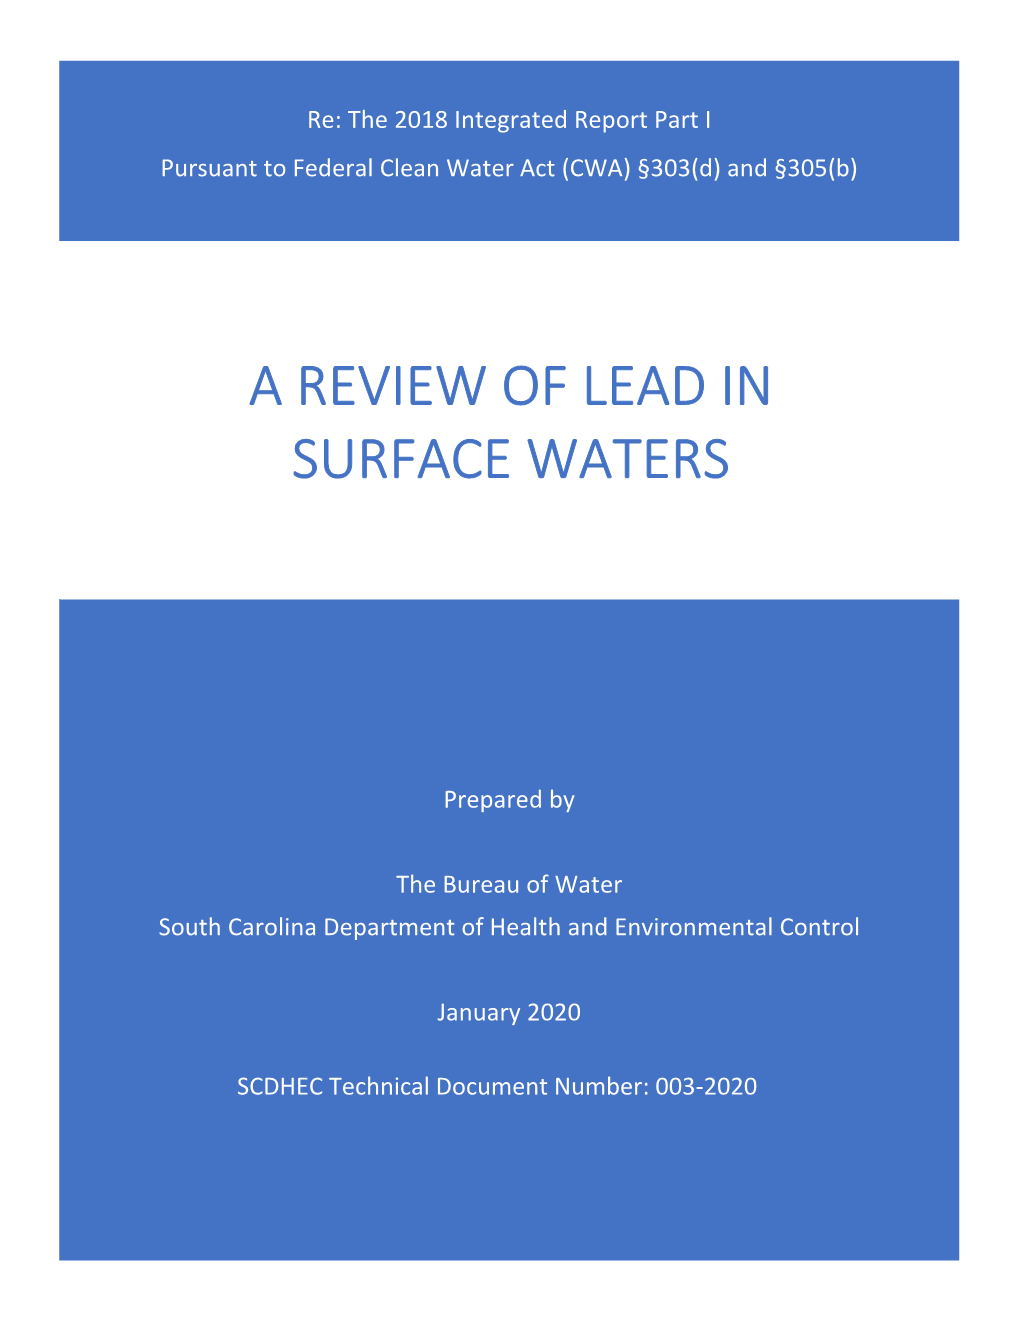 A Review of Lead in Surface Waters